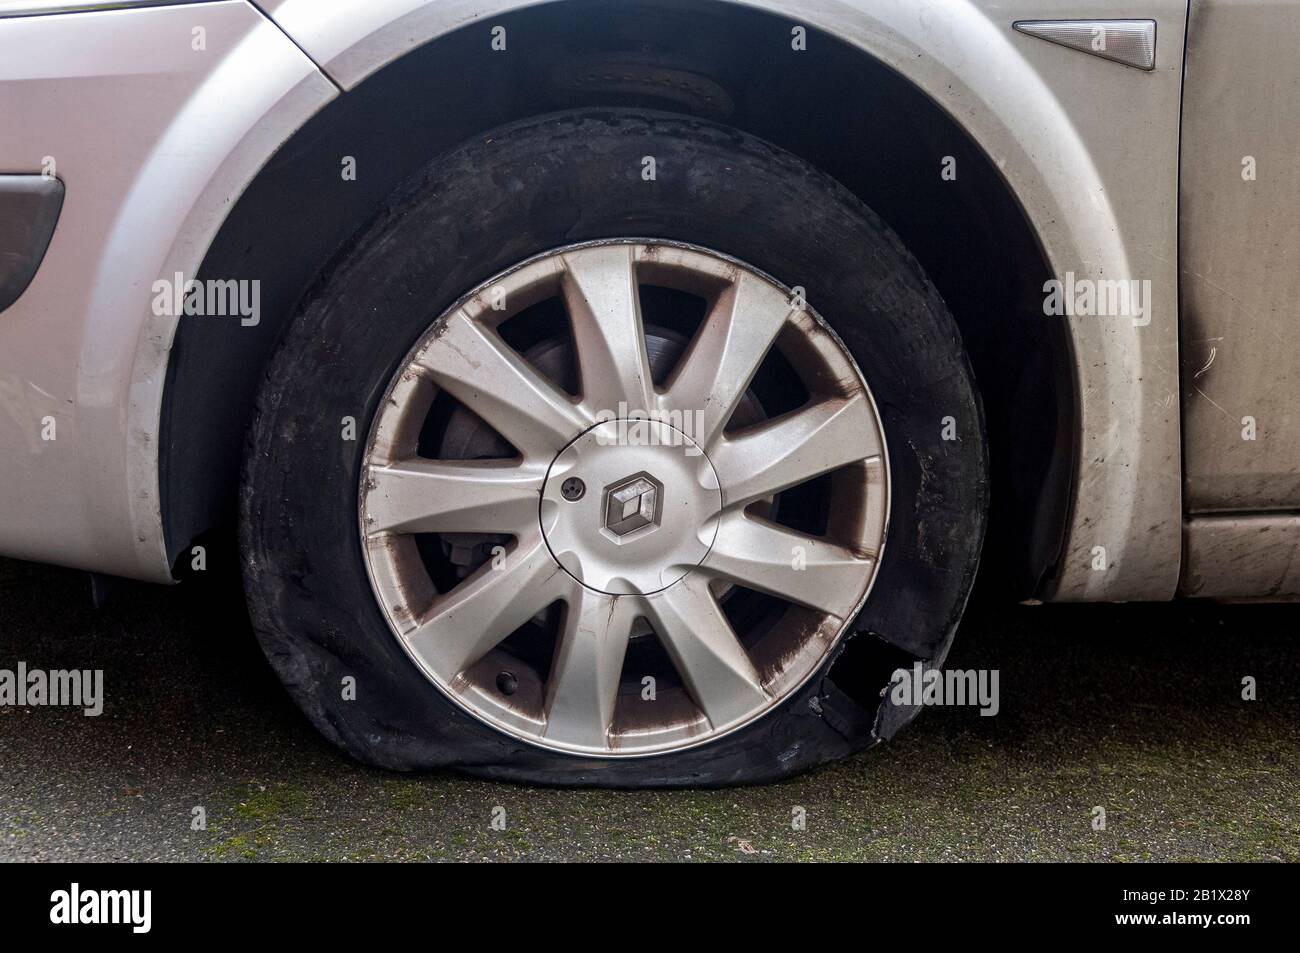 A large hole in the wall of a tyre after a blowout.  The rim of the alloy wheel is also damaged. Stock Photo